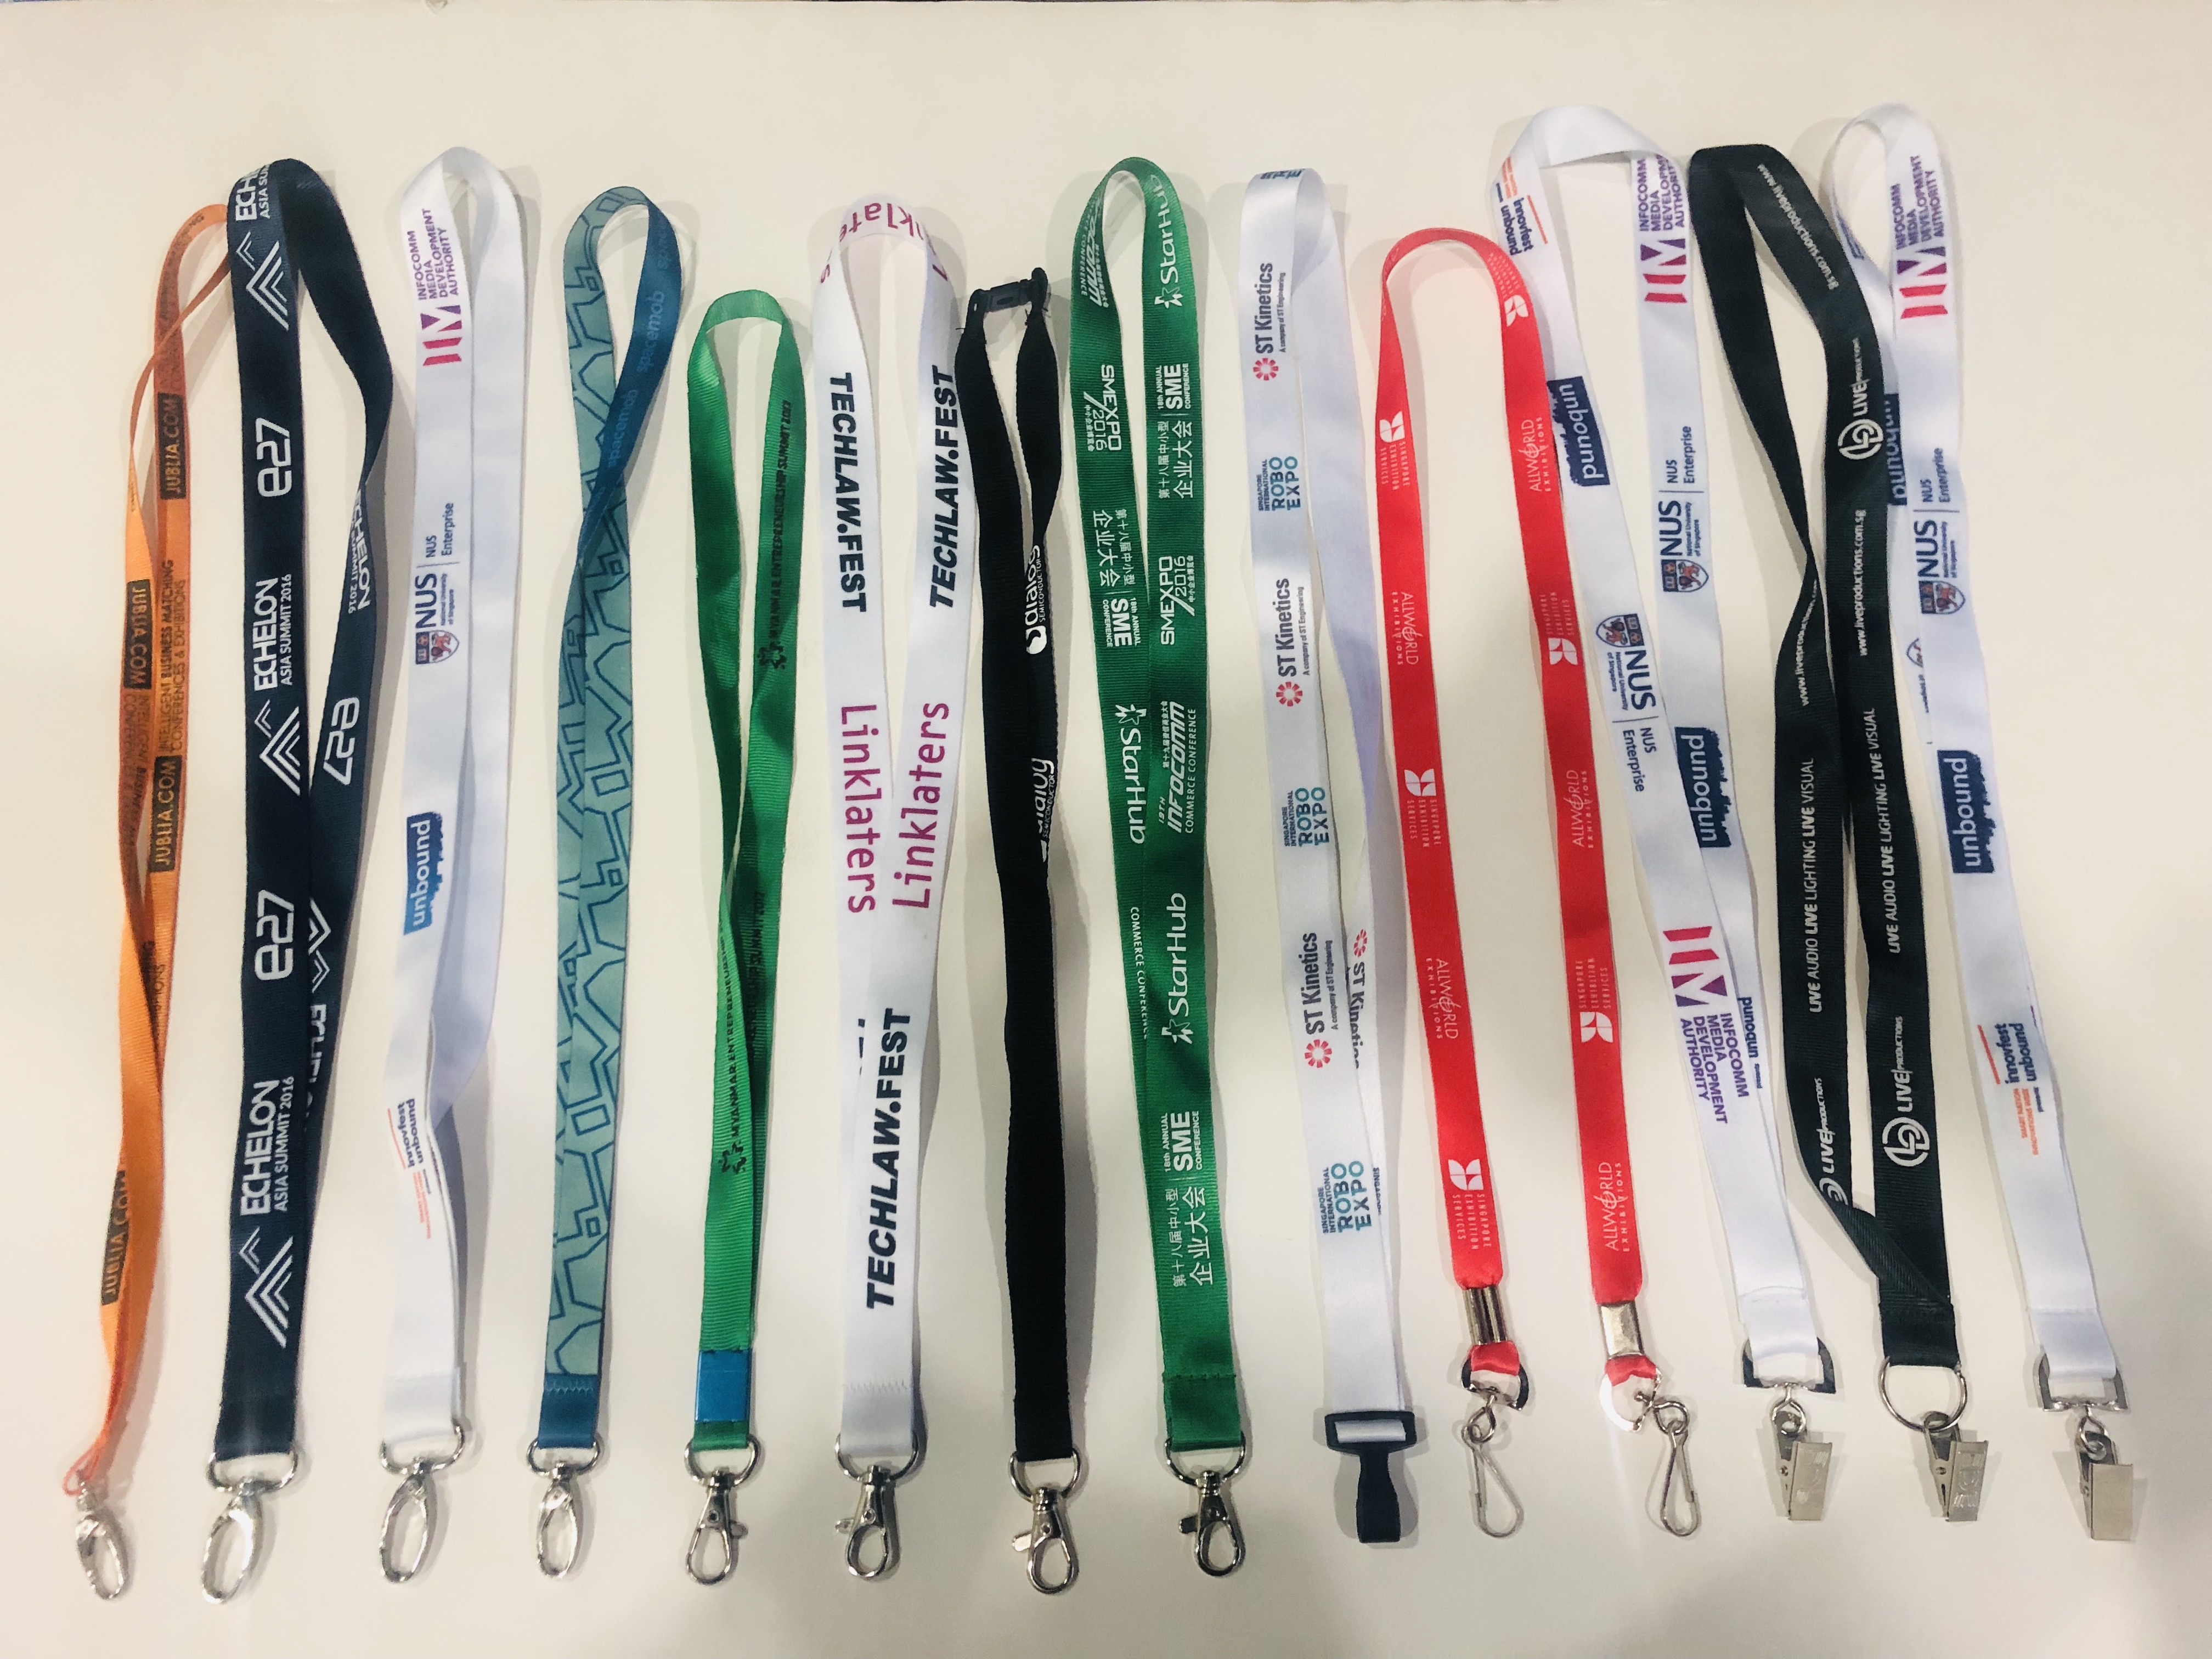 Different types of lanyard clips and hooks